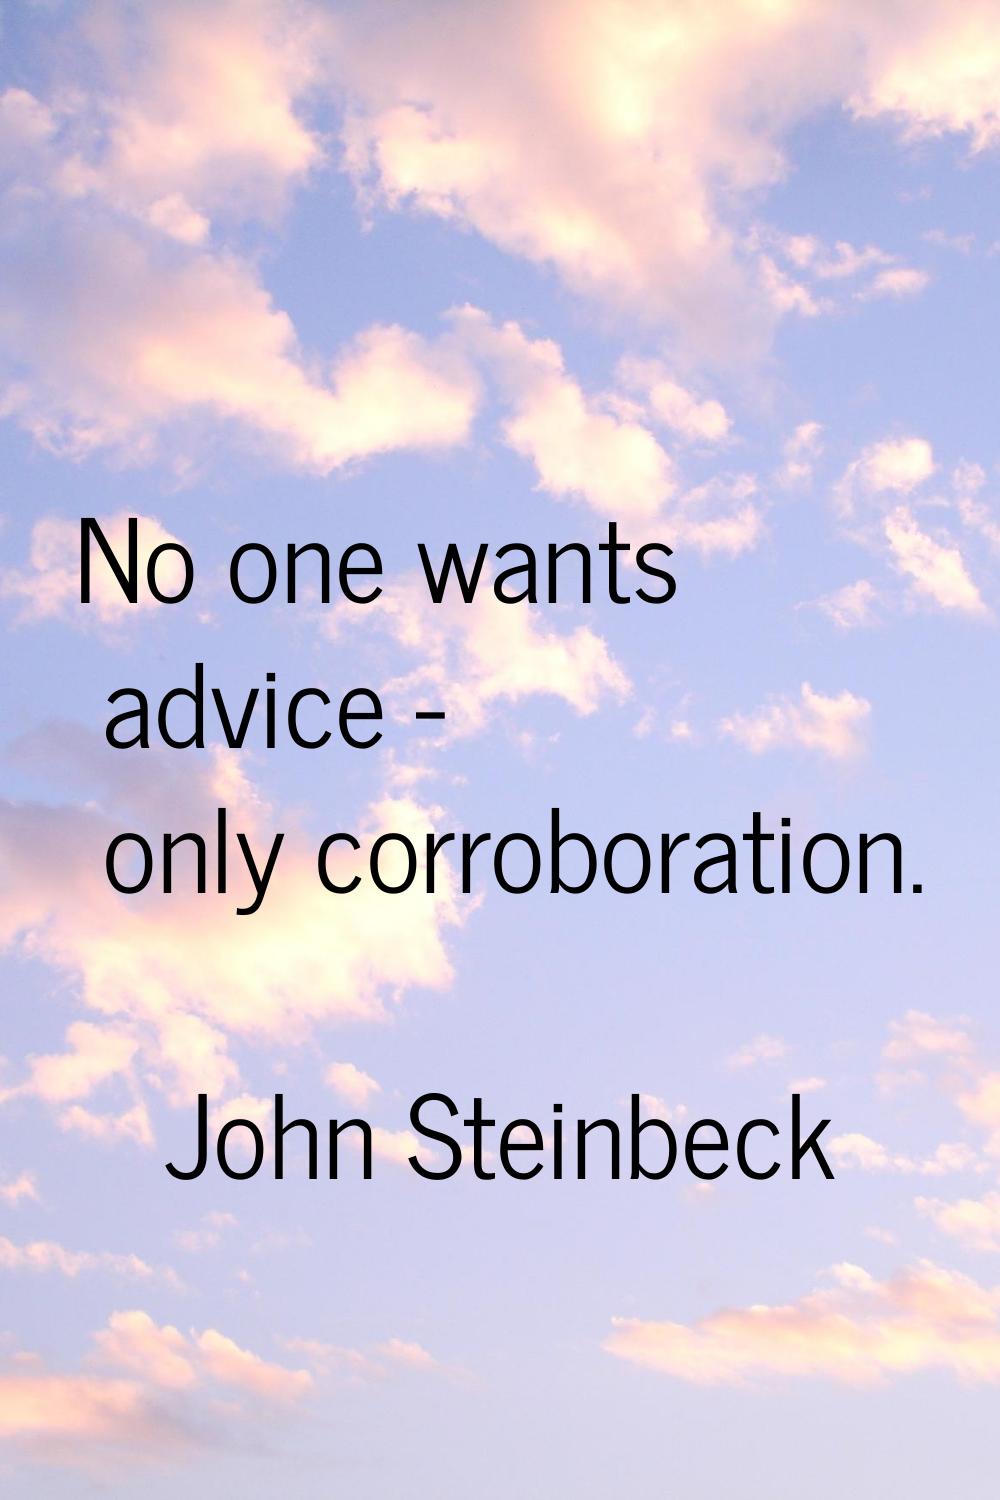 No one wants advice - only corroboration.